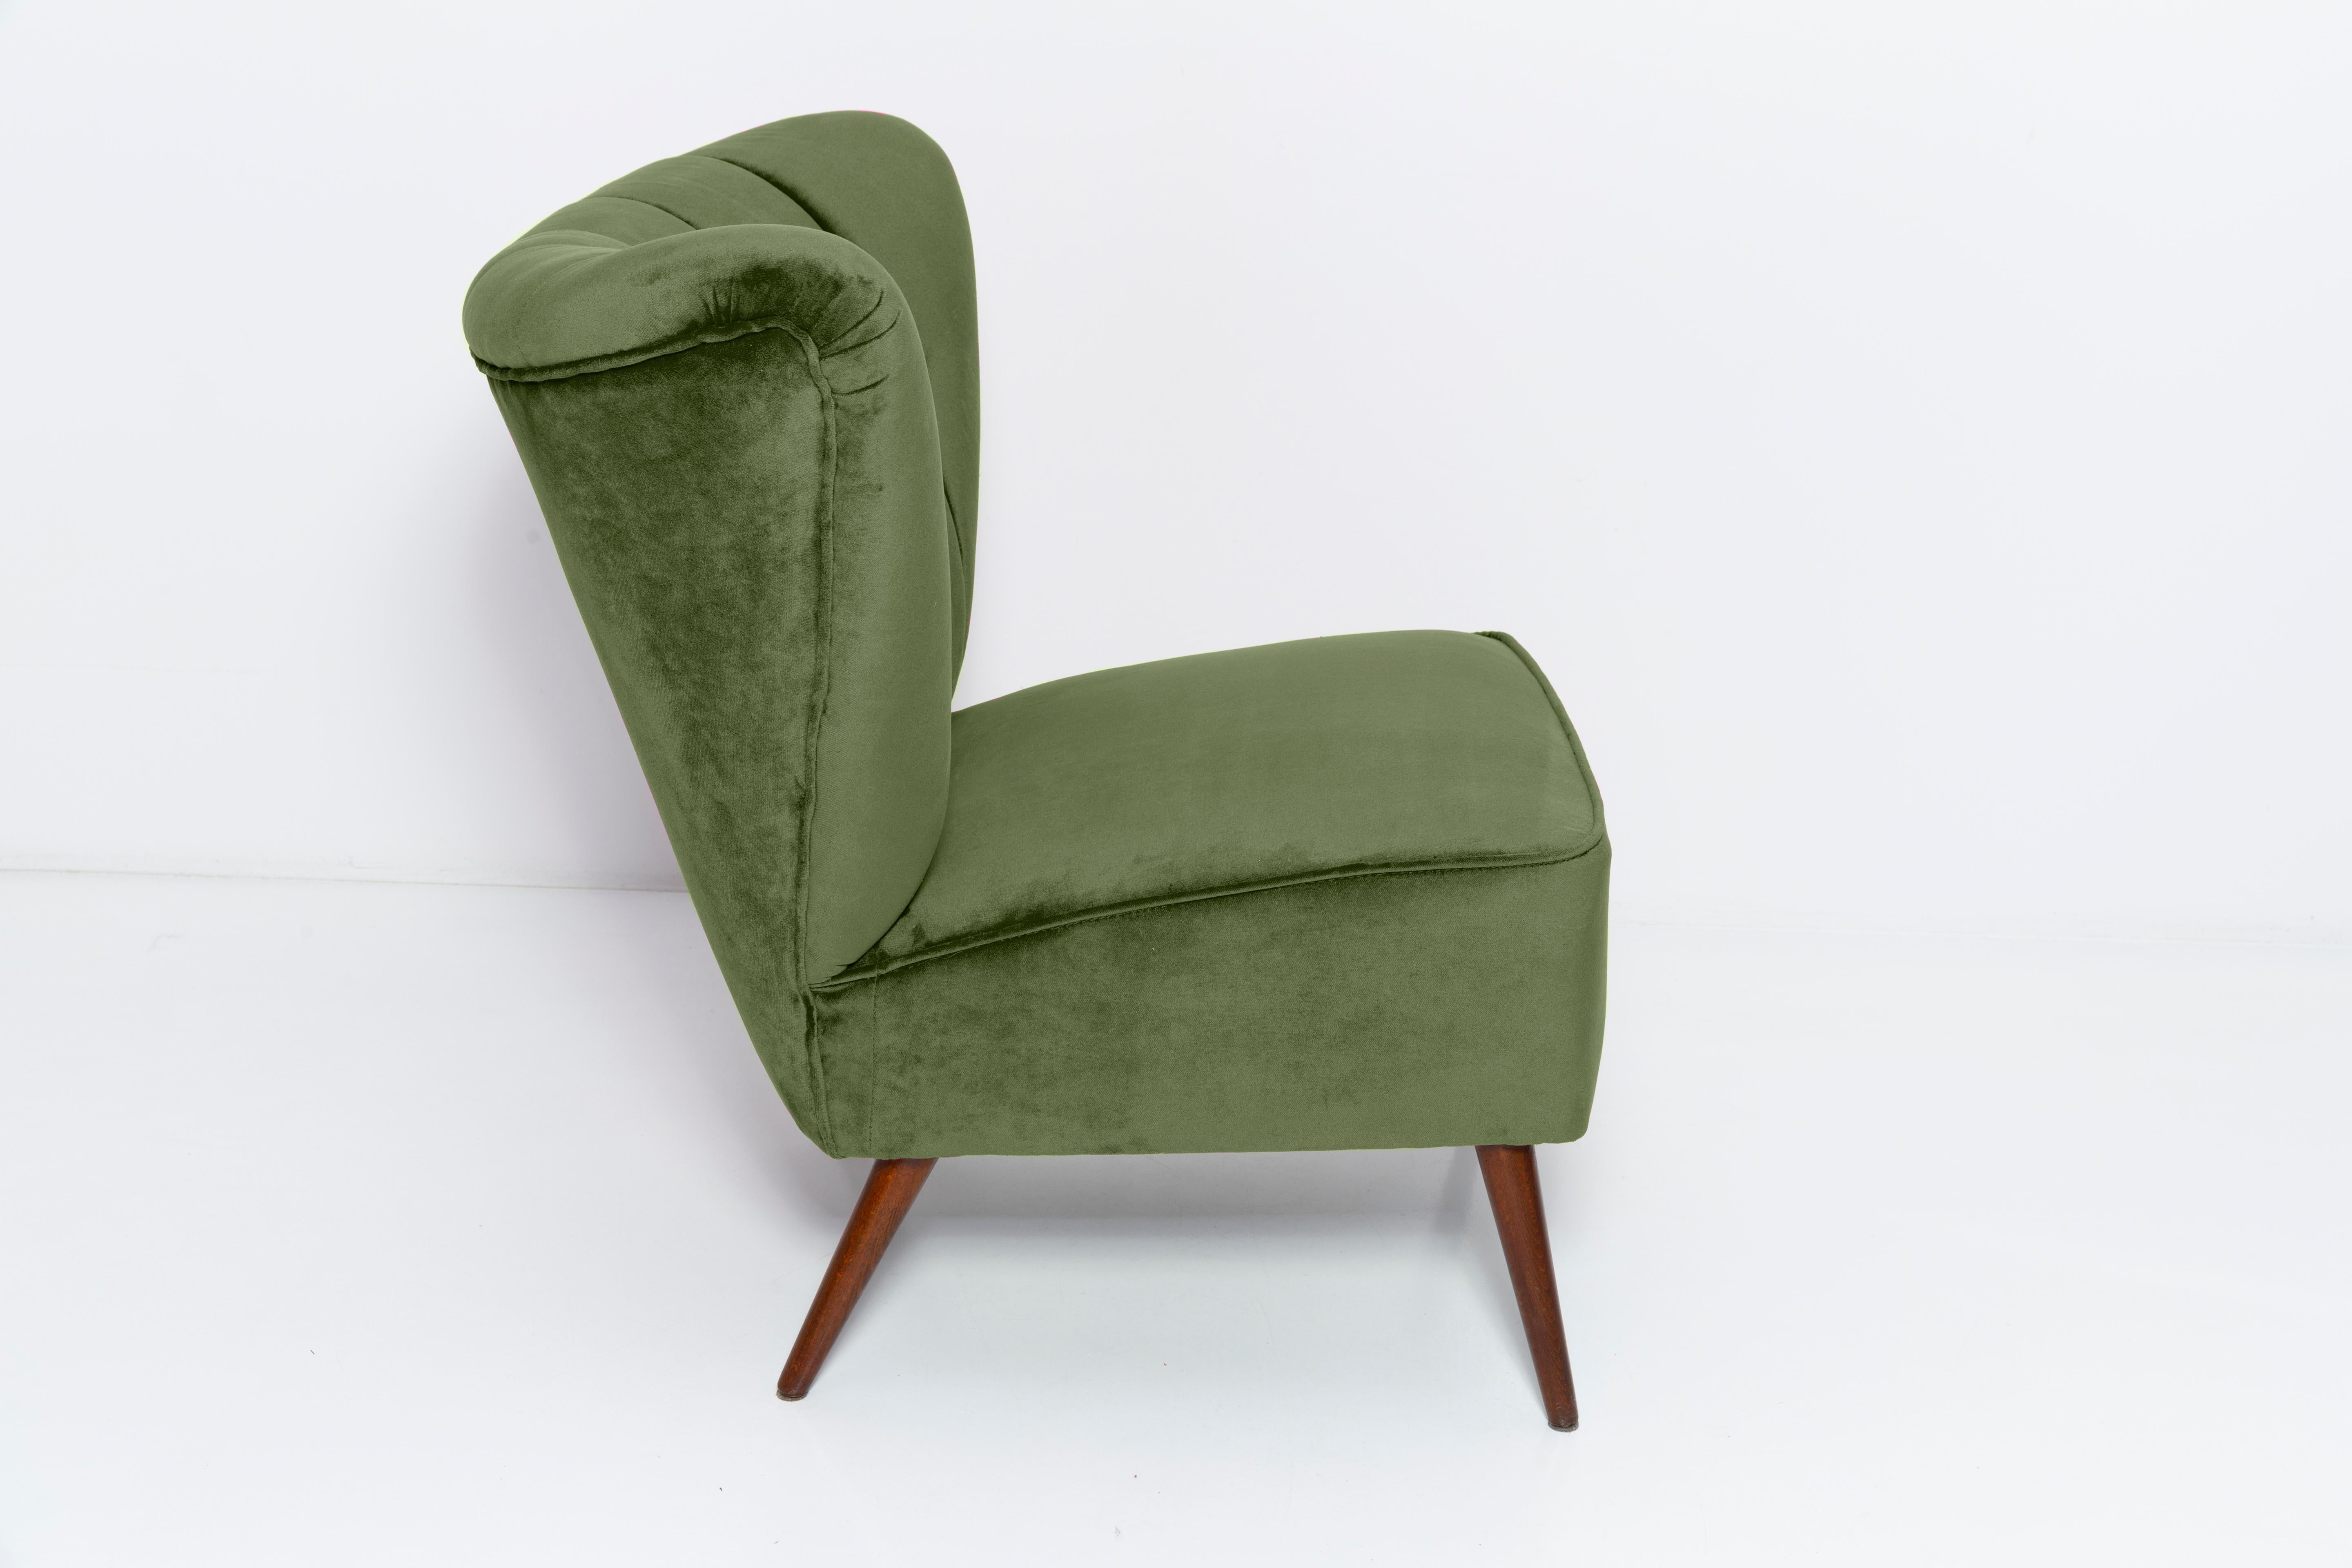 Springy, very comfortable and stabile polish club seat. Produced in the 1960s at the Karl Lindner factory in Germany. Original Vintage amazing furniture. The whole armchair is covered with high-quality italian green velour (color 963). Very